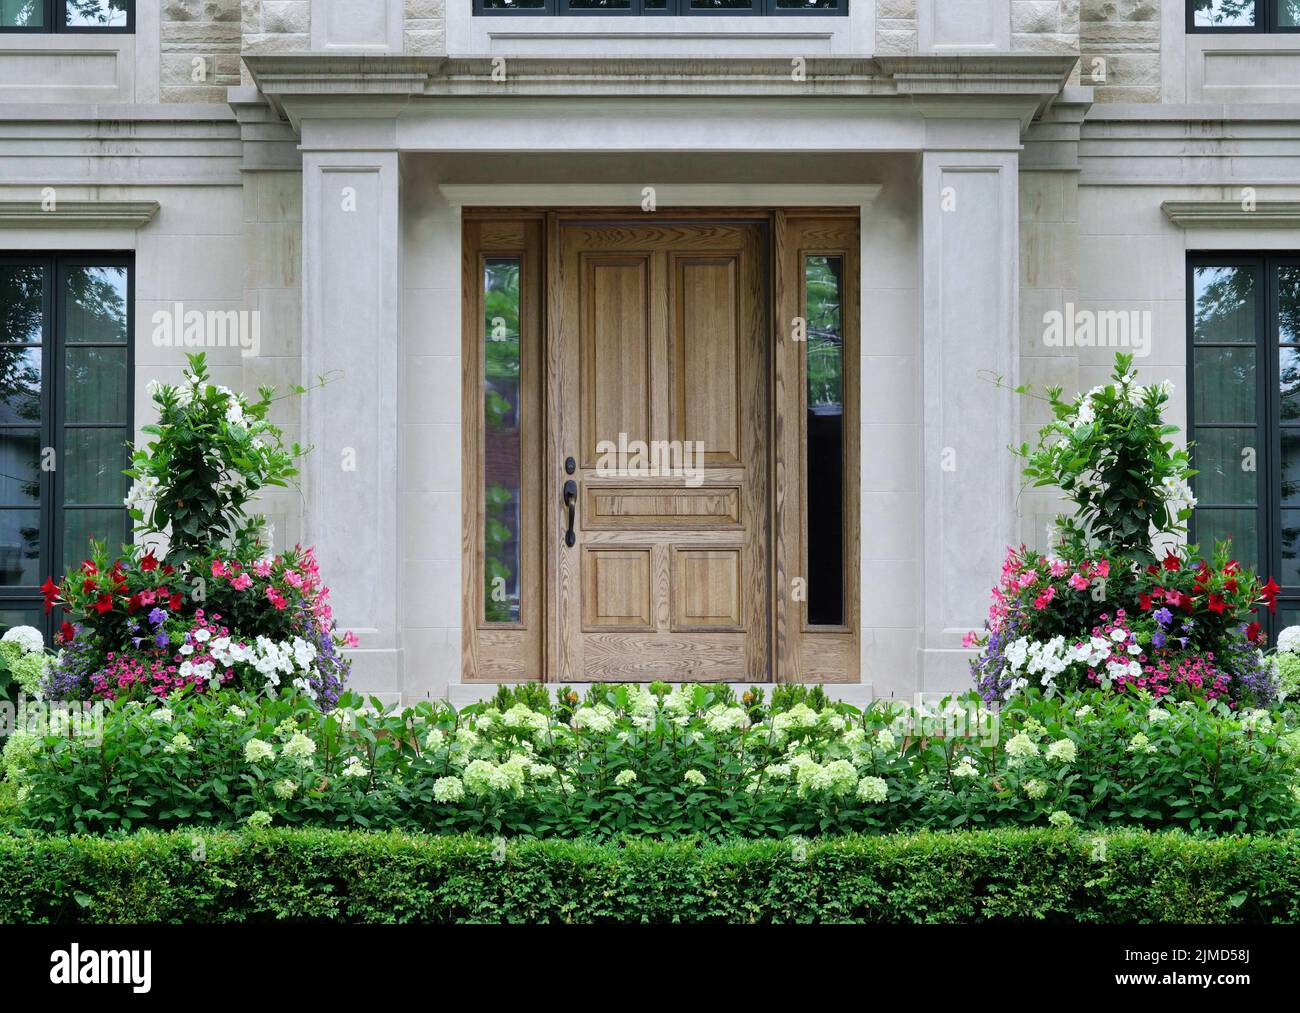 Wood grain front door of house surrounded by columns and summer flowers Stock Photo